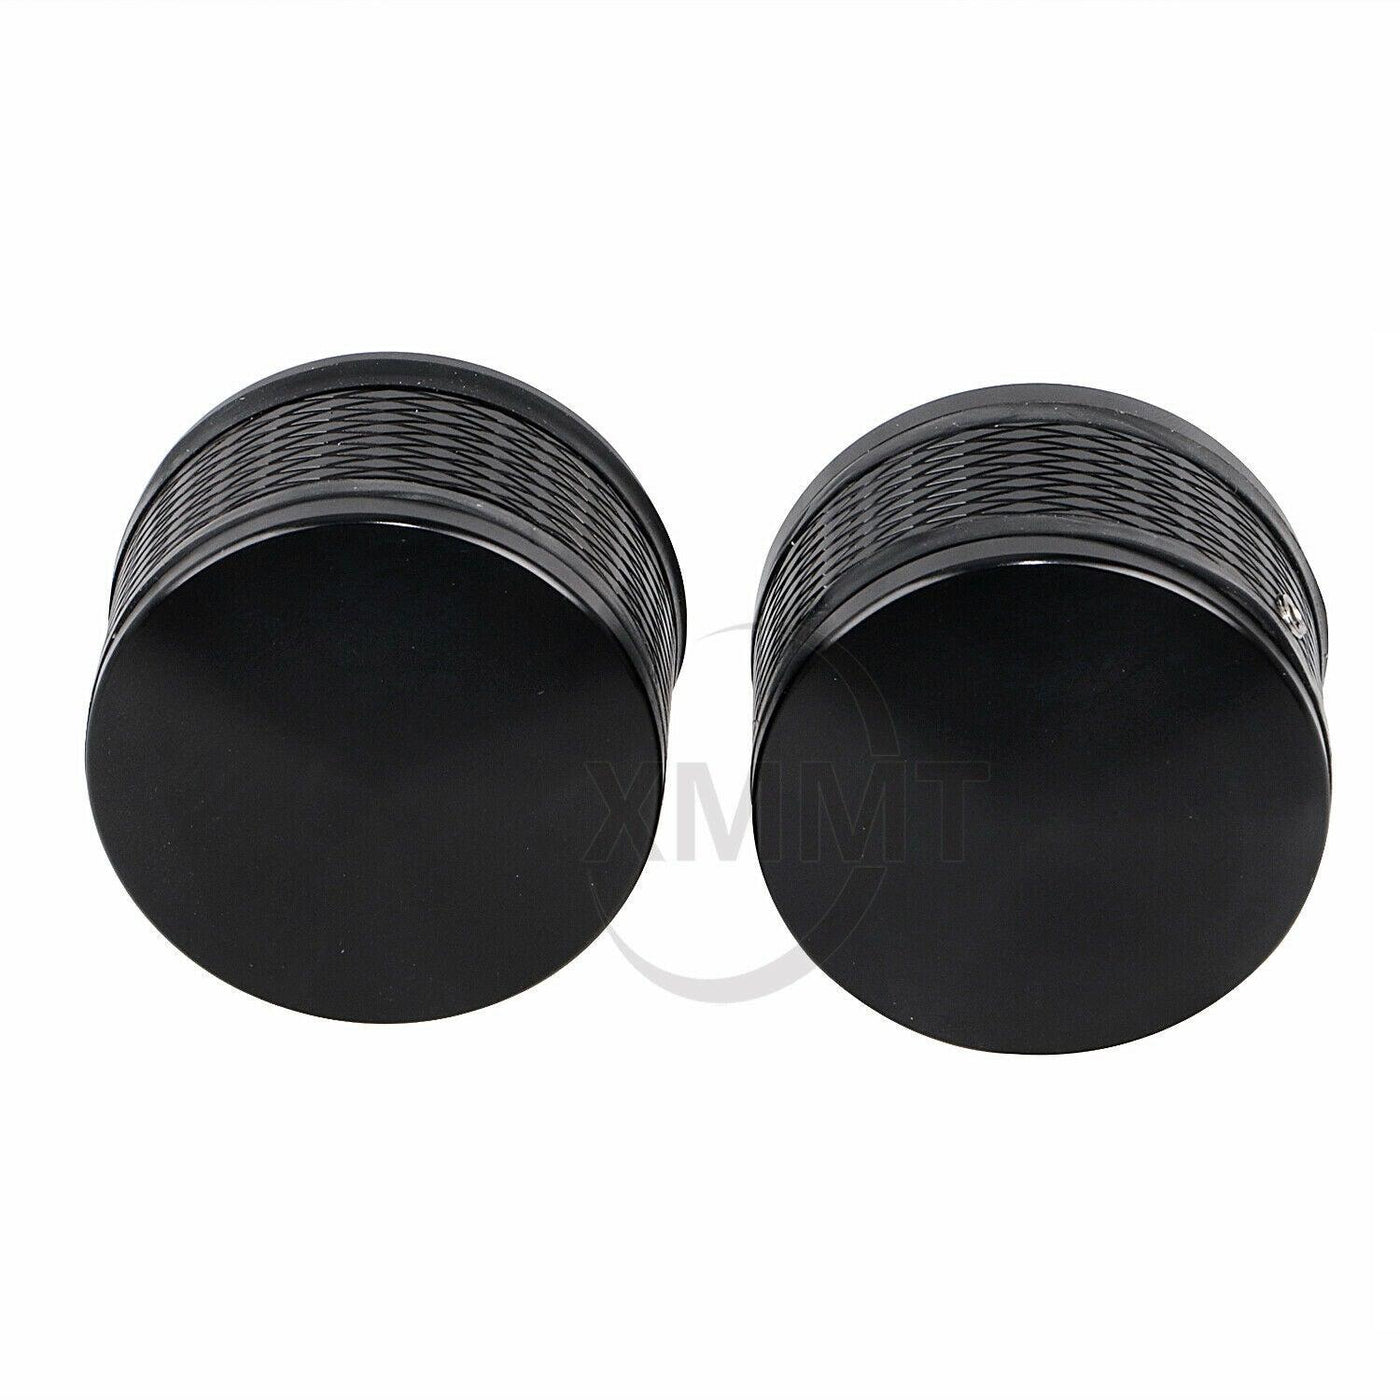 Black Front Axle Cap Nut Cover For Harley Softail Dyna Touring Road King Glide - Moto Life Products